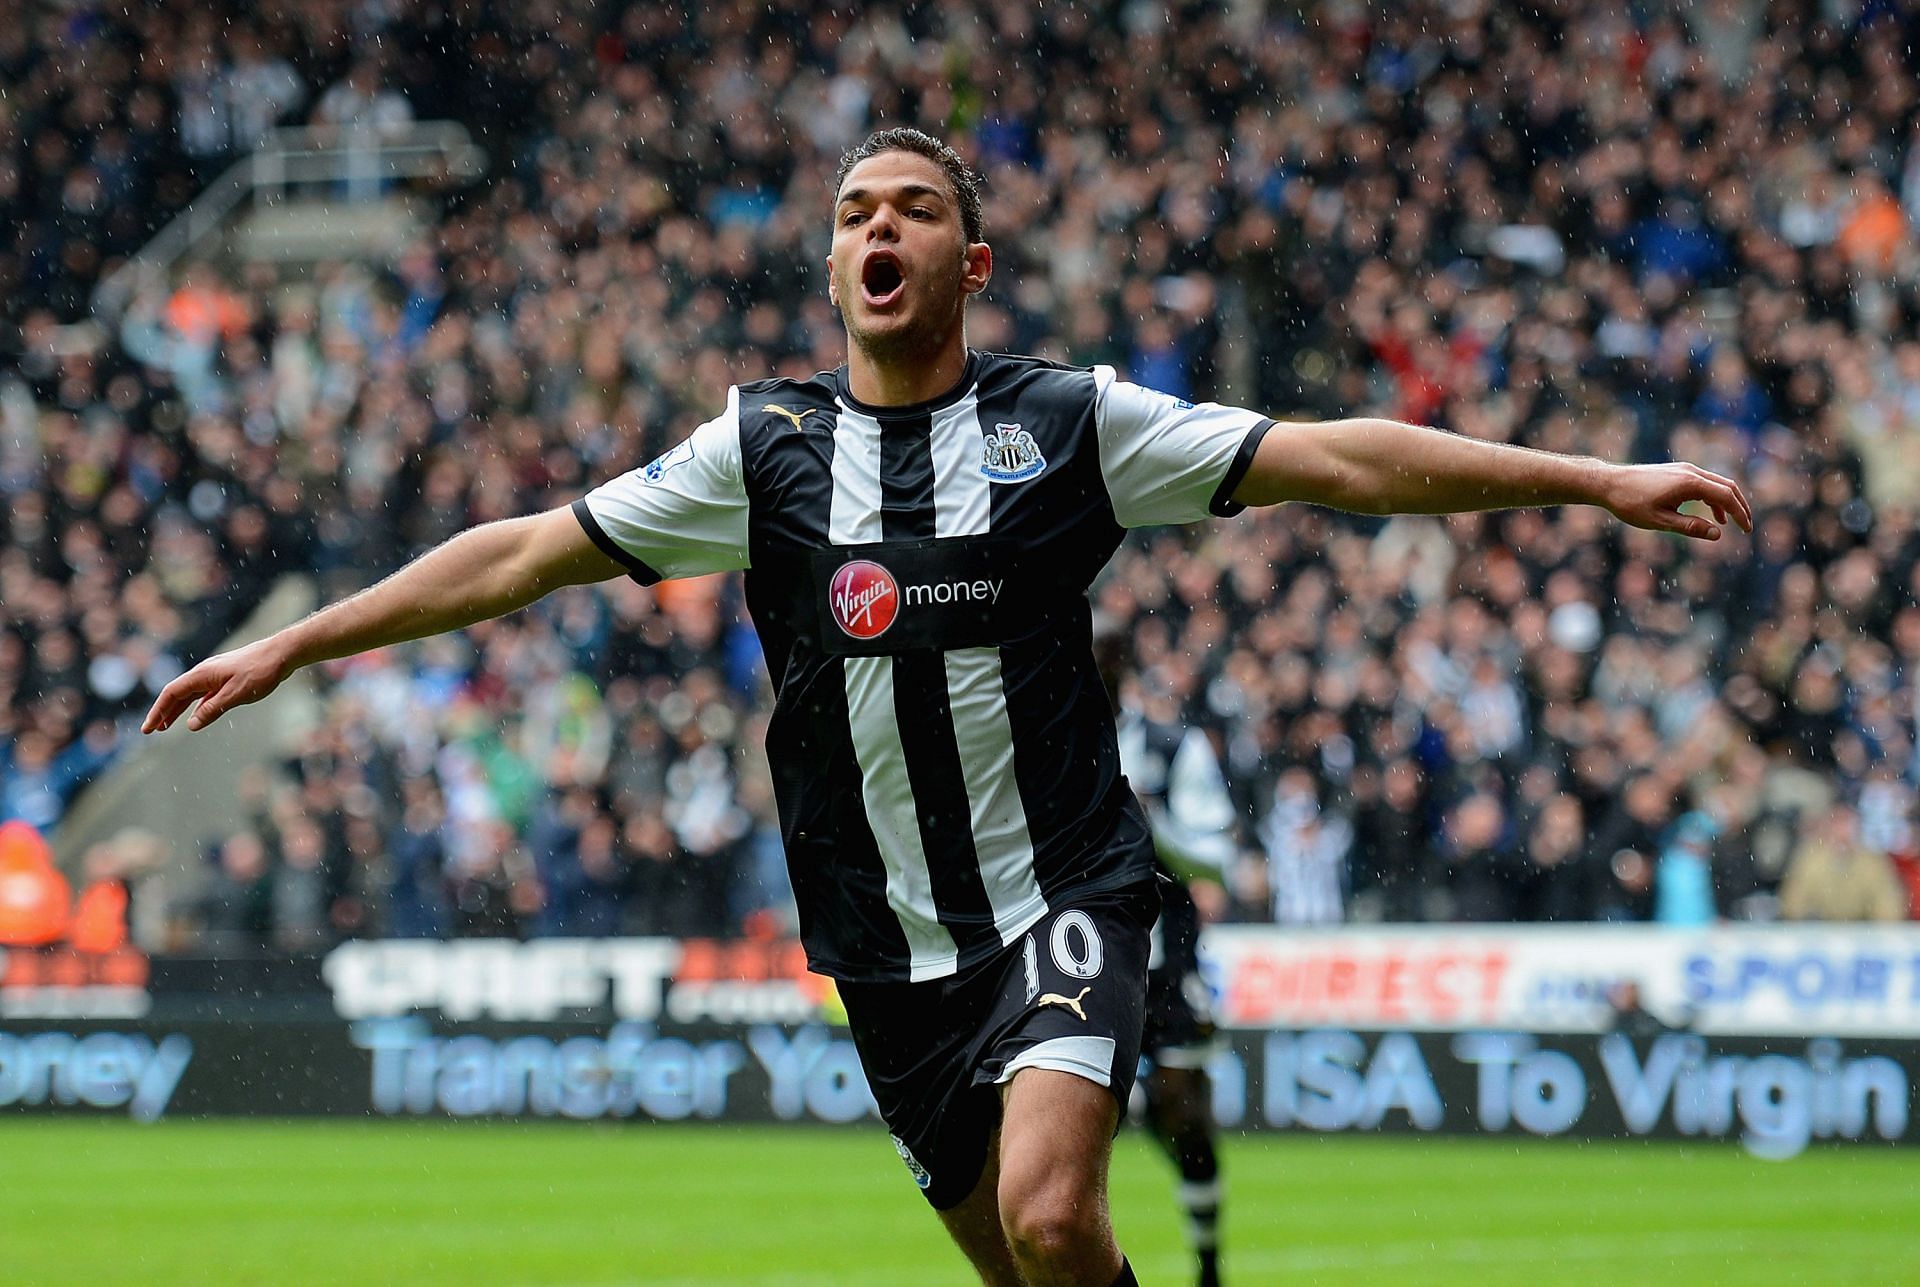 Ben Arfa played for Newcastle and Hull before joining PSG